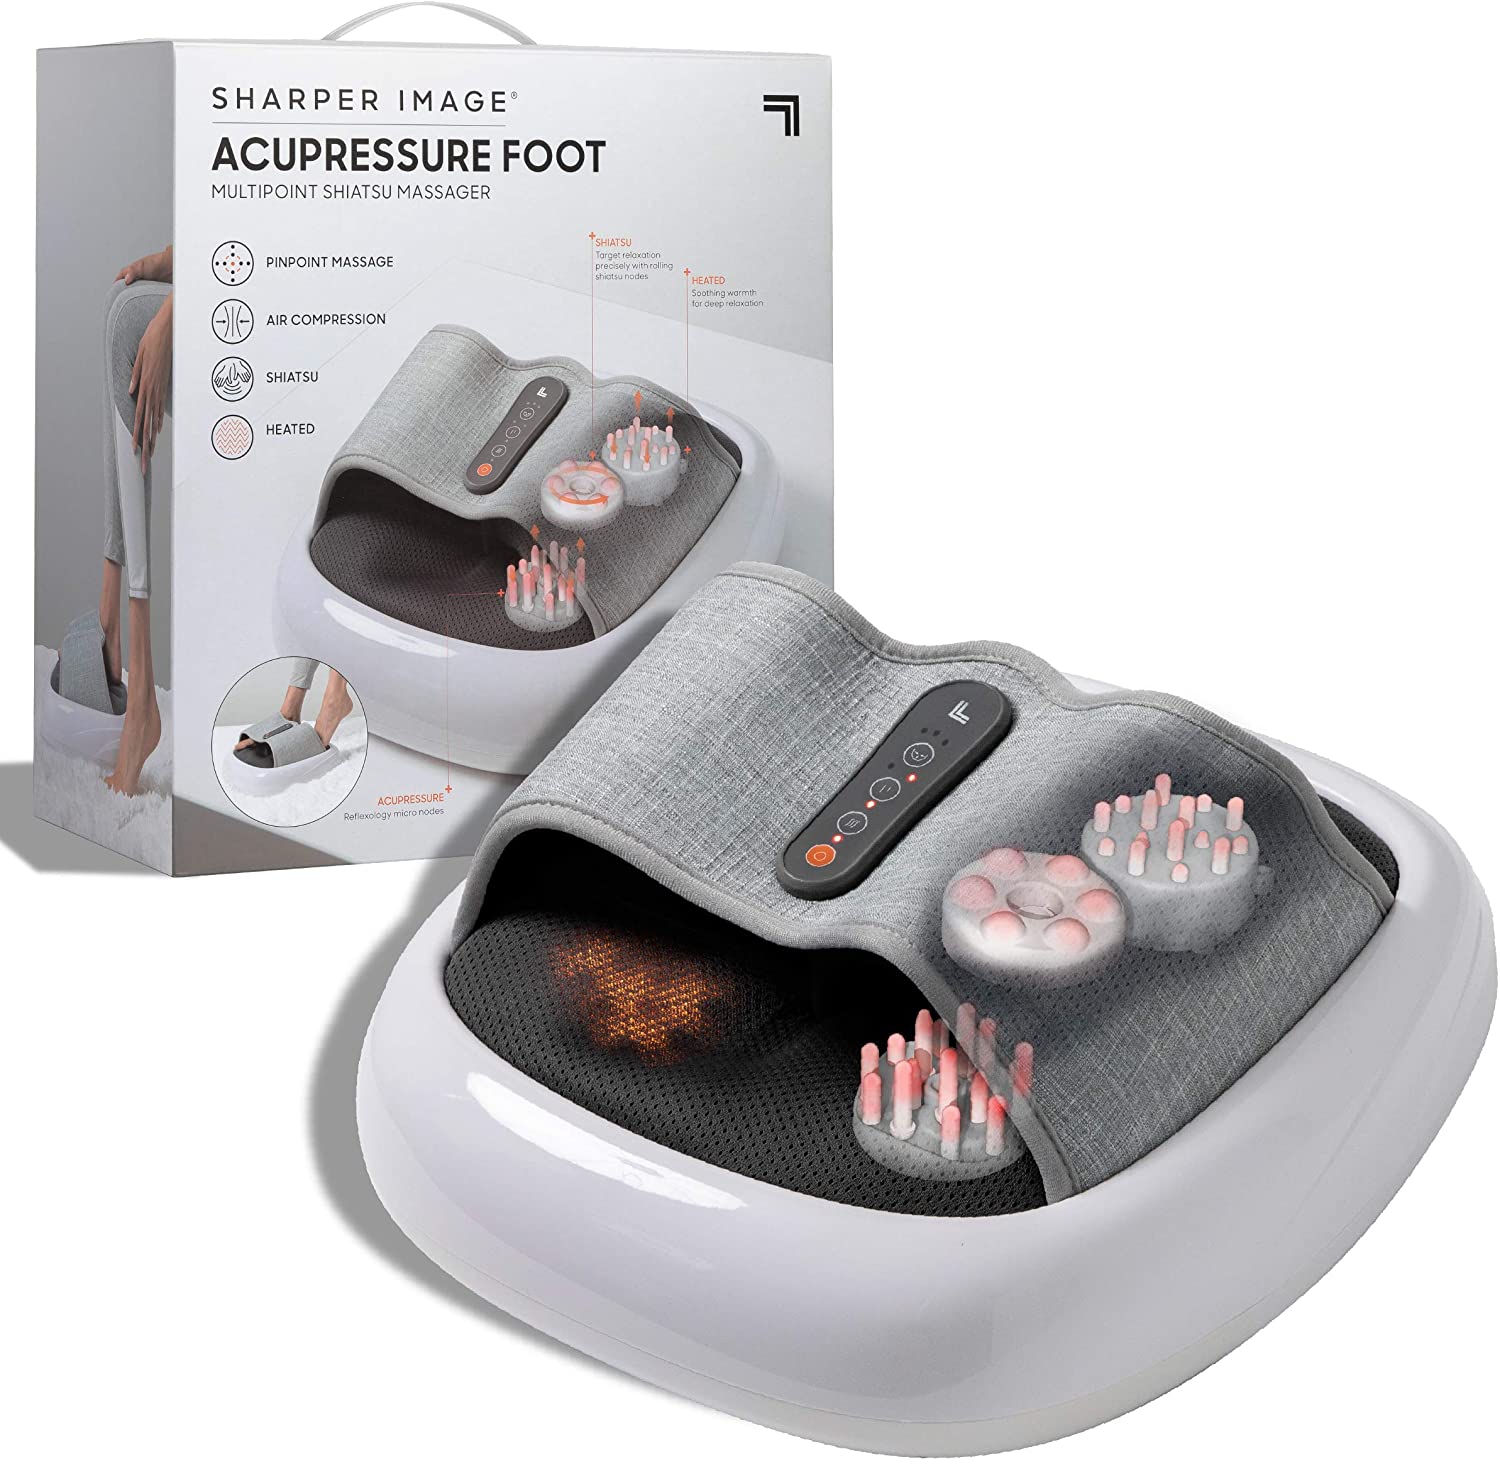 Review of SHARPER IMAGE Acupoint Acupressure Foot Massager Machine